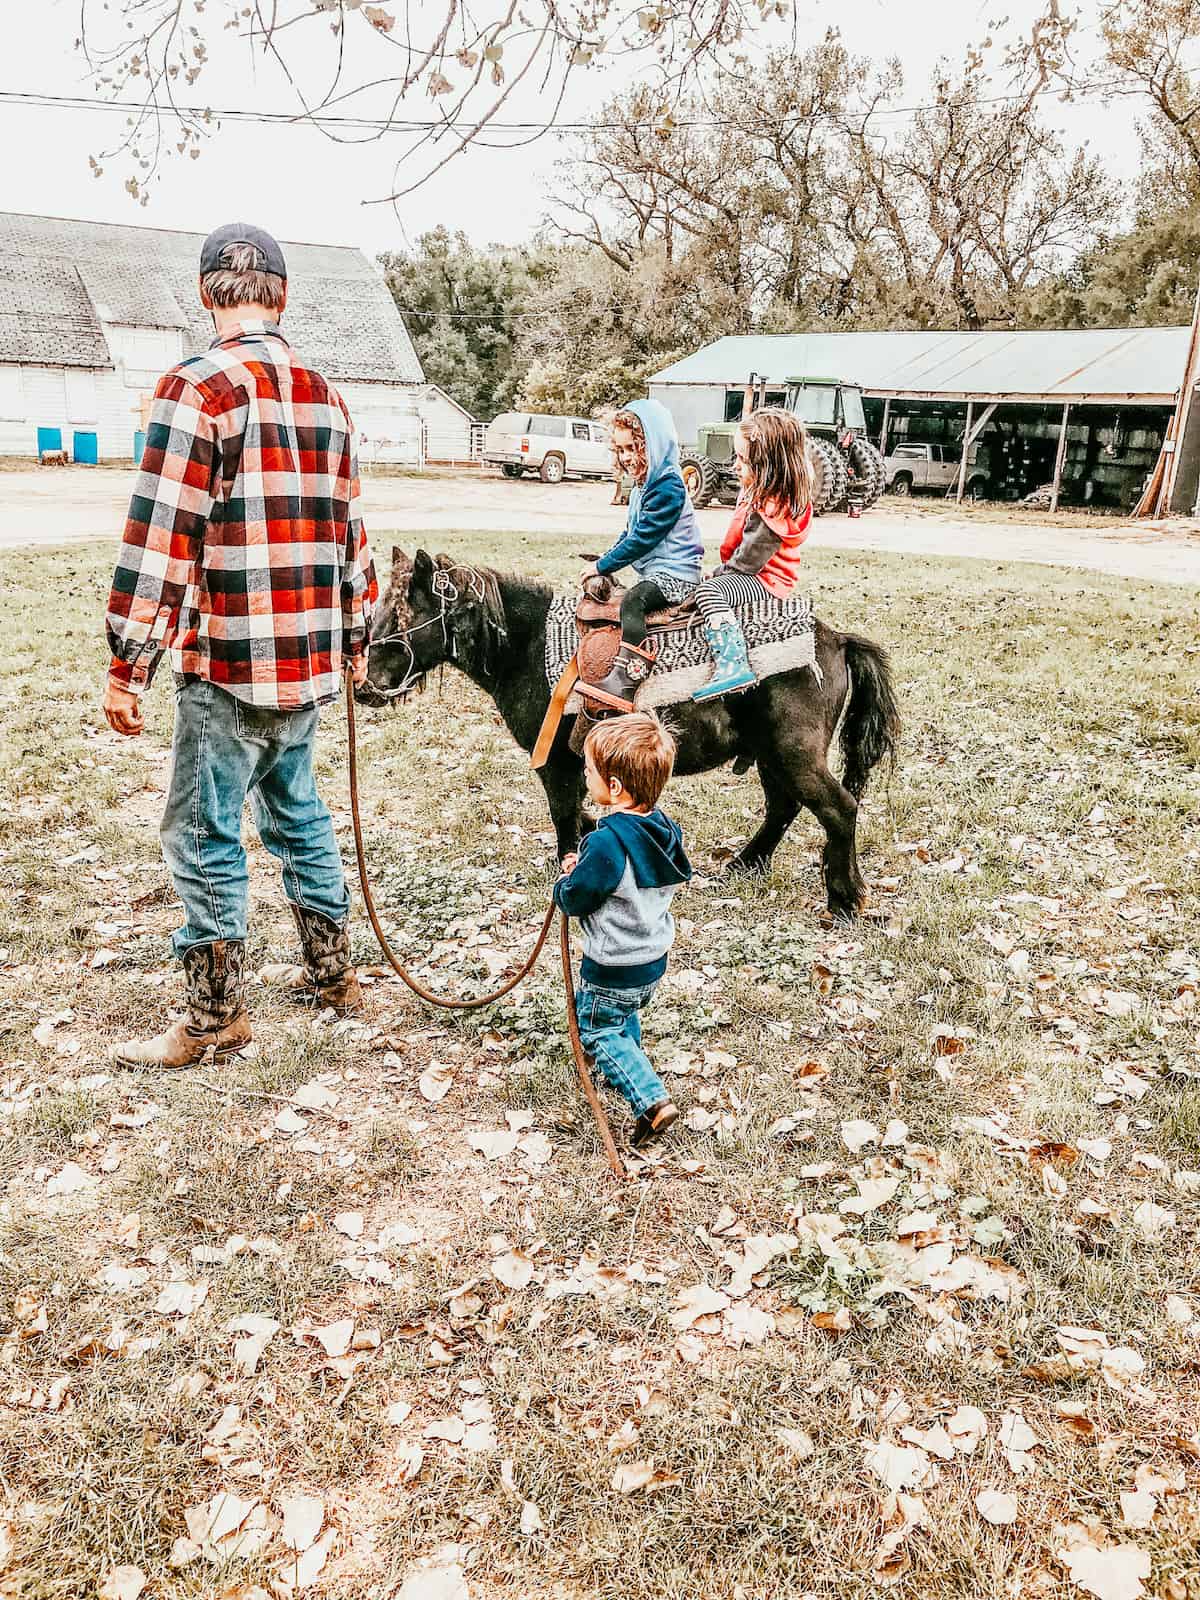 dad leading young children on a mini horse.